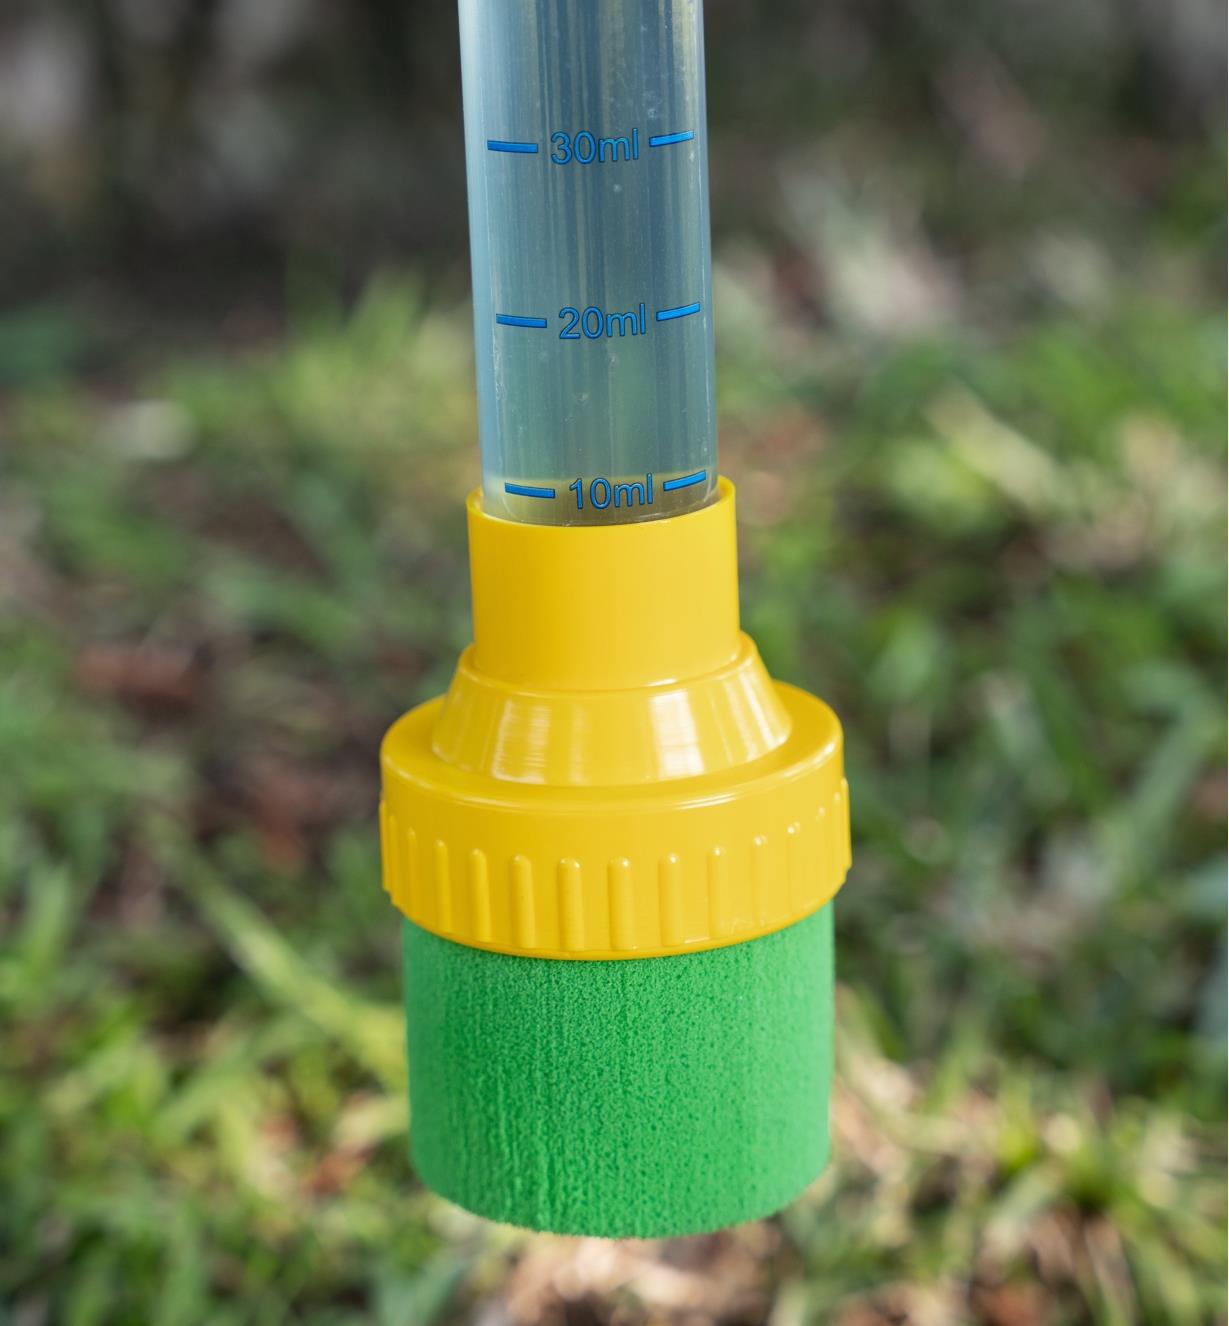 A close-up view of the sponge tip on the end of the weedstick